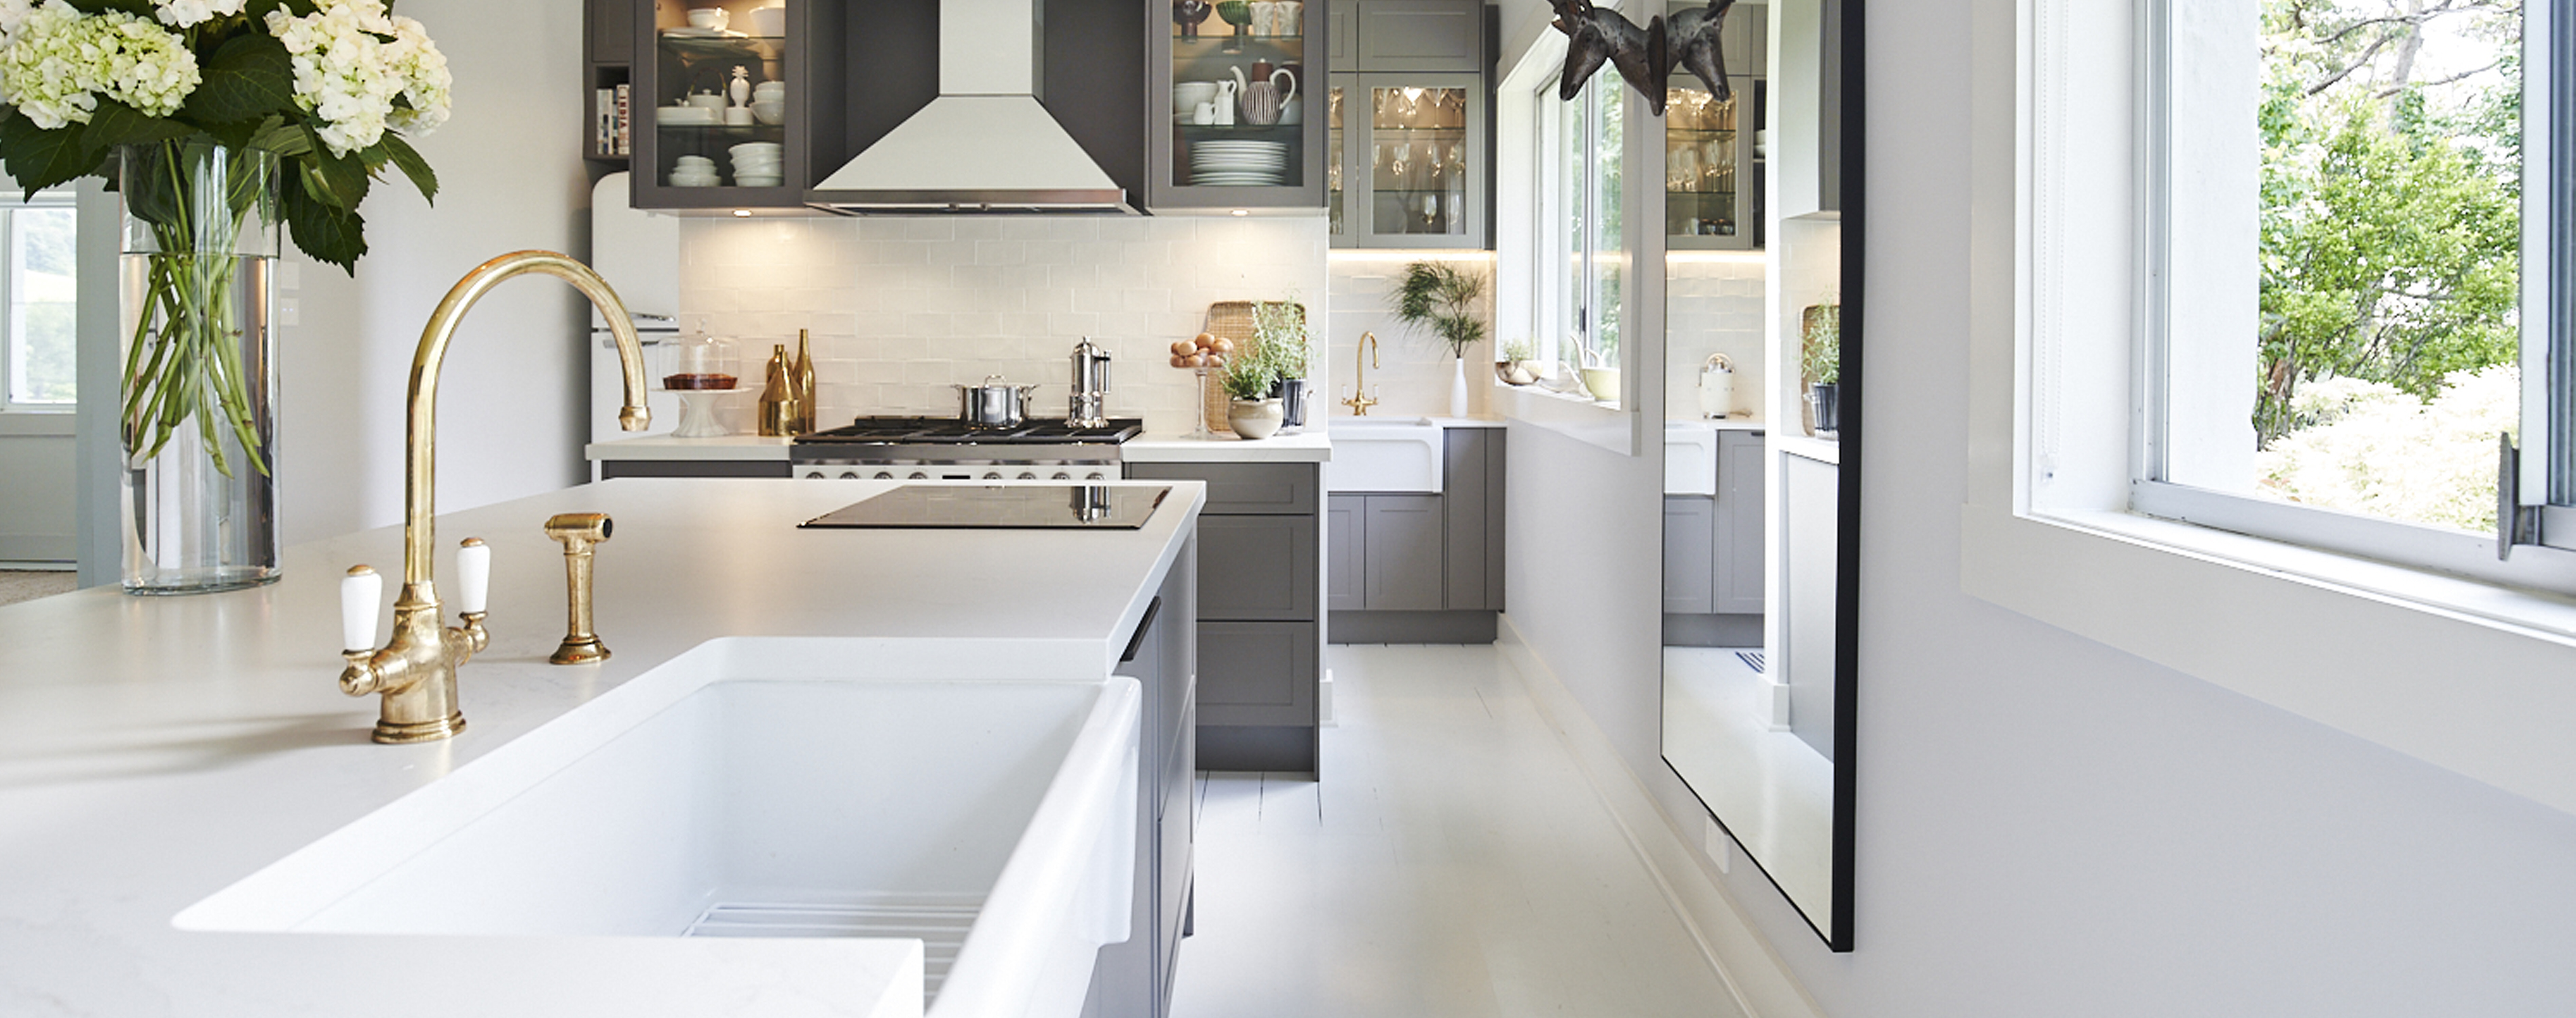 A white stainless-steel kitchen designed by Kinsman